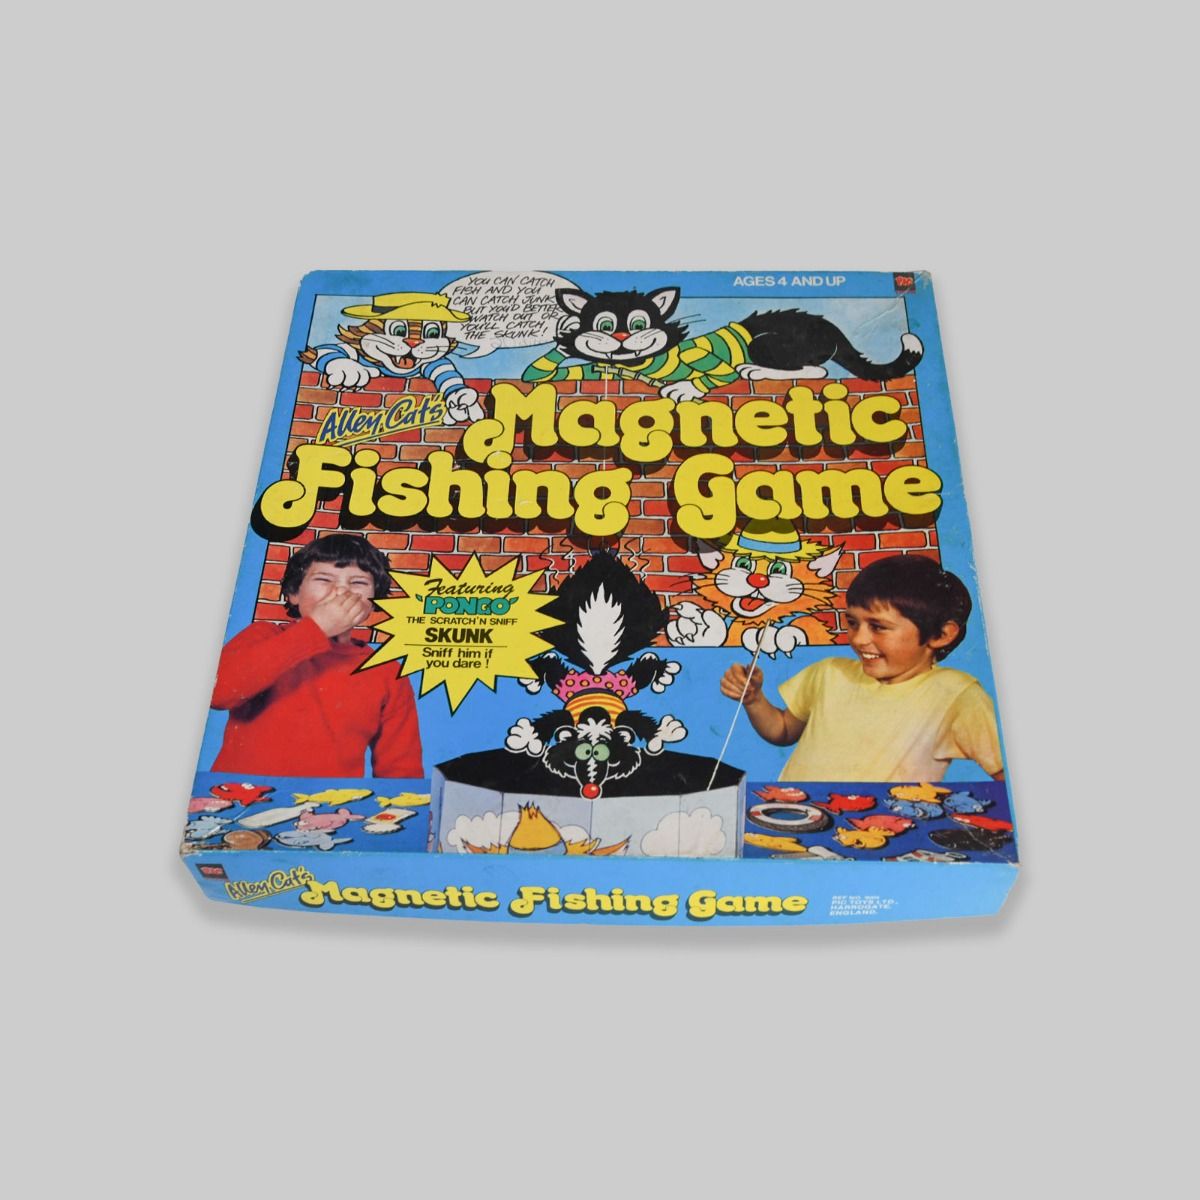 'Alley Cat's Magnetic Fishing Game' 1980 Game